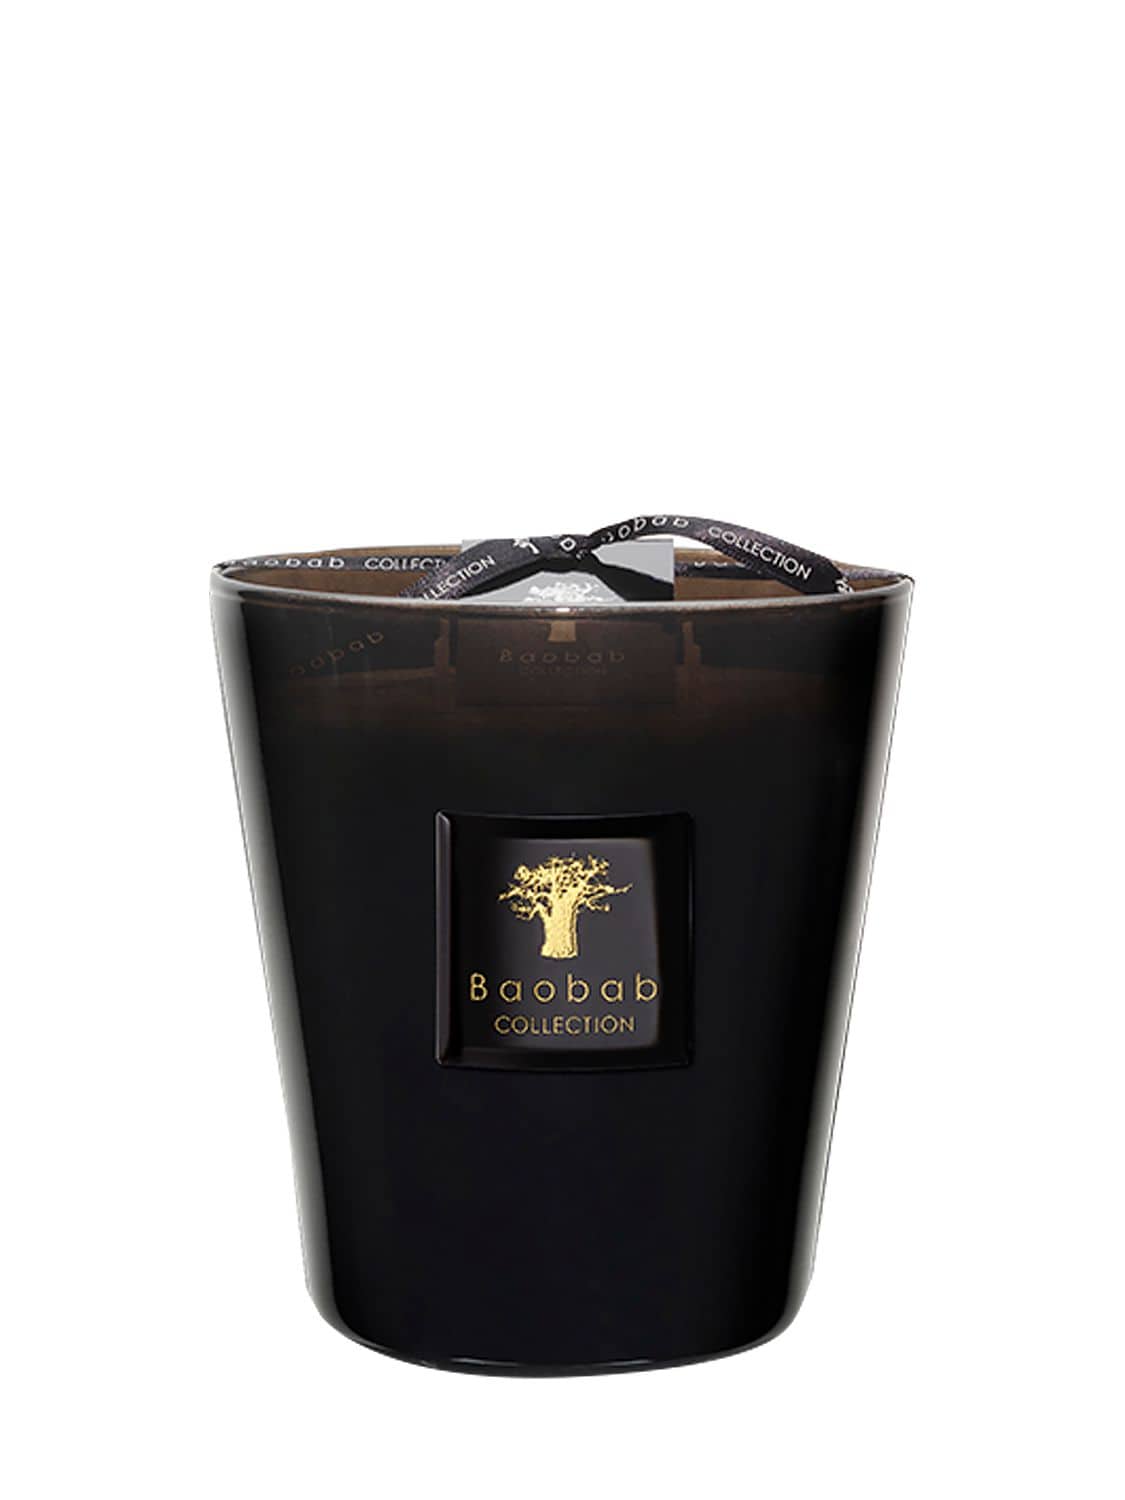 Baobab Collection 1.1kg Encre De Chine Candle In Black